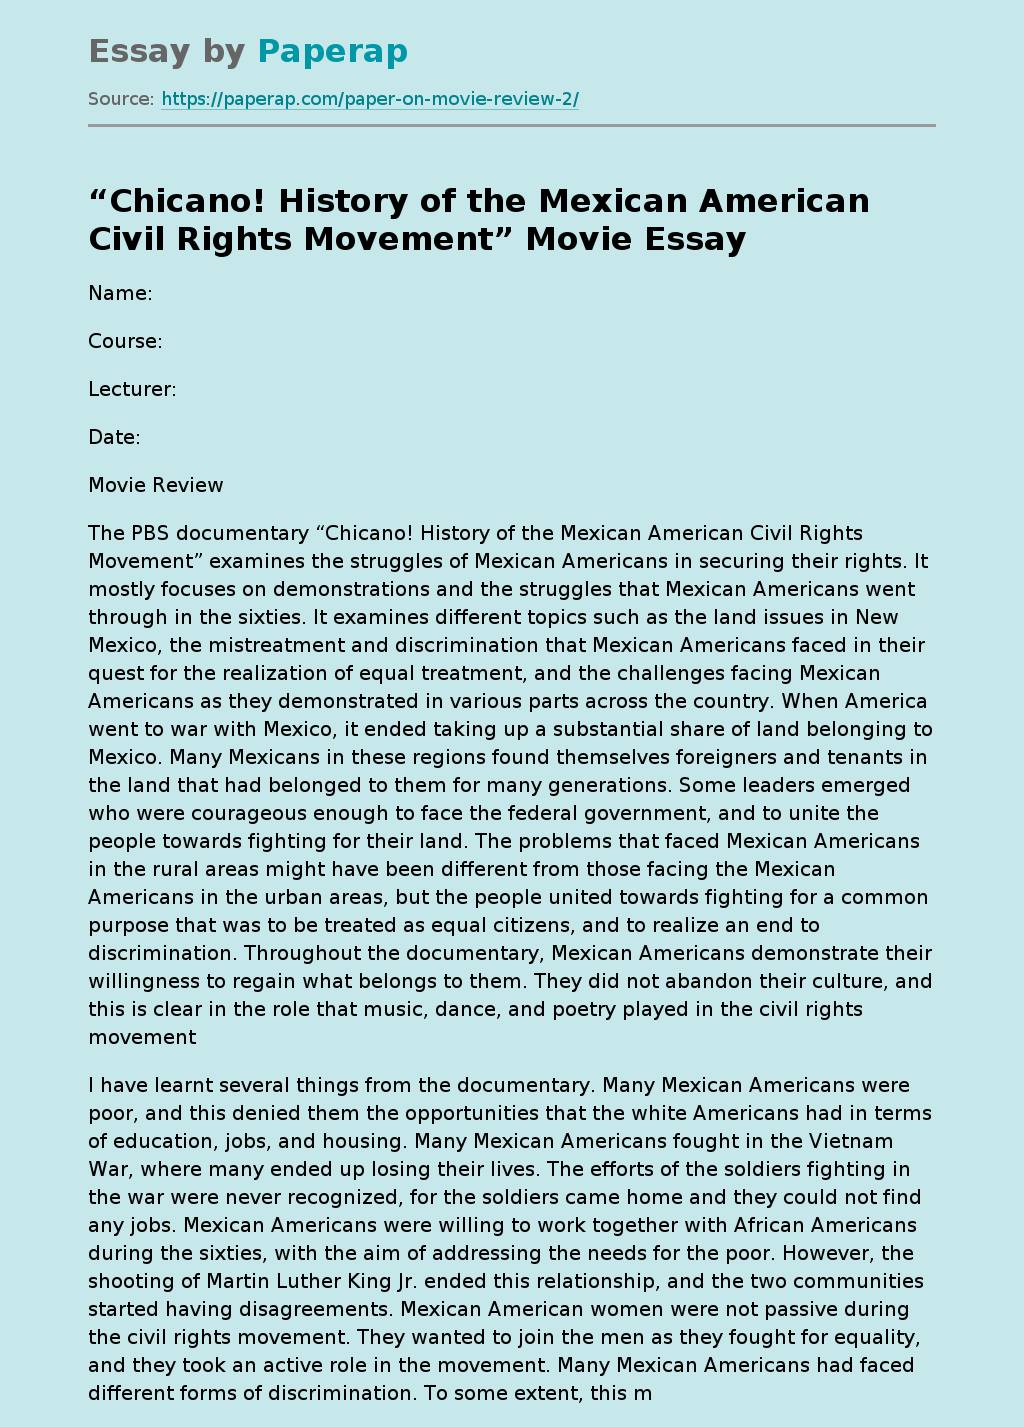 “Chicano! History of the Mexican American Civil Rights Movement” Movie